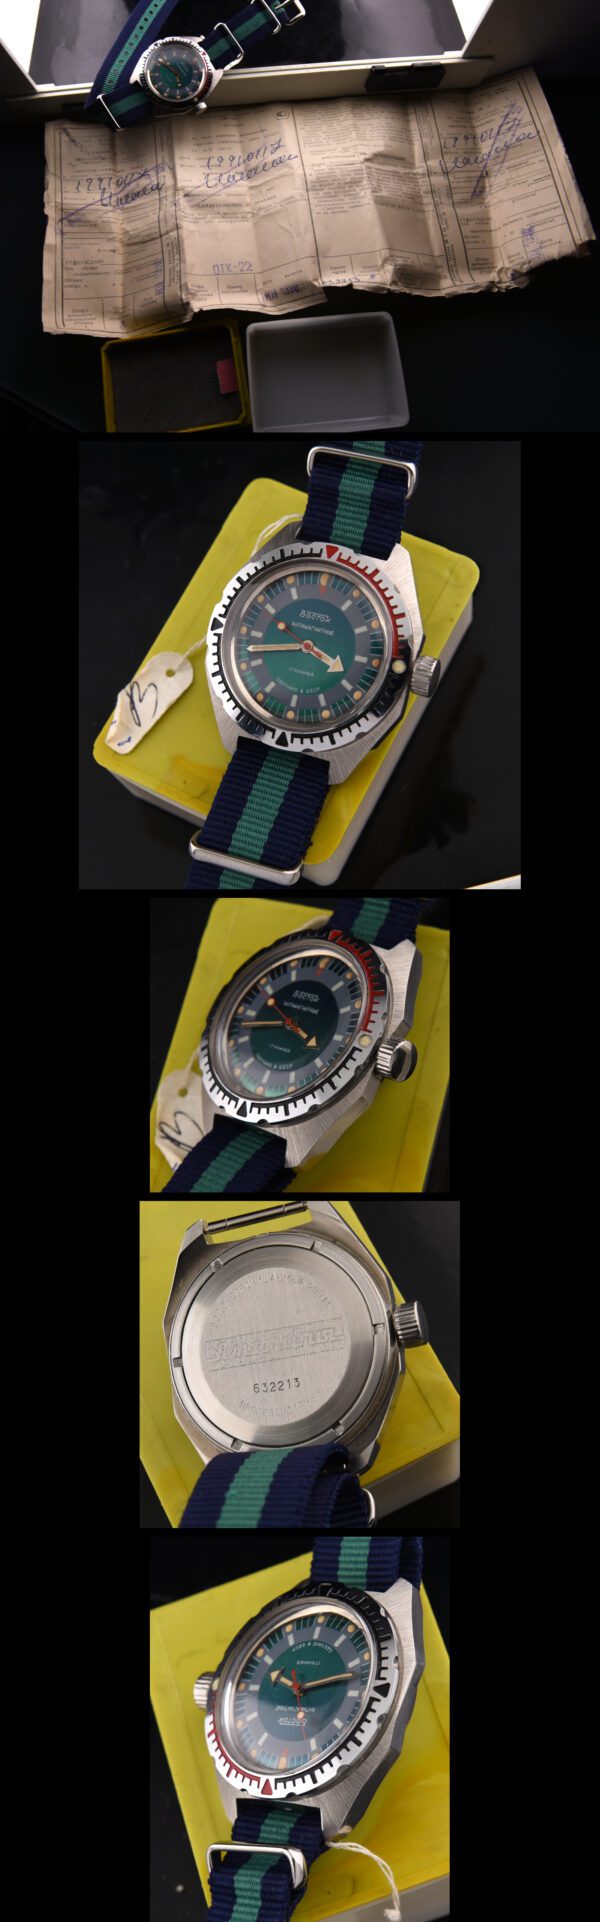 1990 Russian Vostok 42mm Amphibian Submarine stainless steel dive watch with original green dial, papers/box, and manual winding movement.